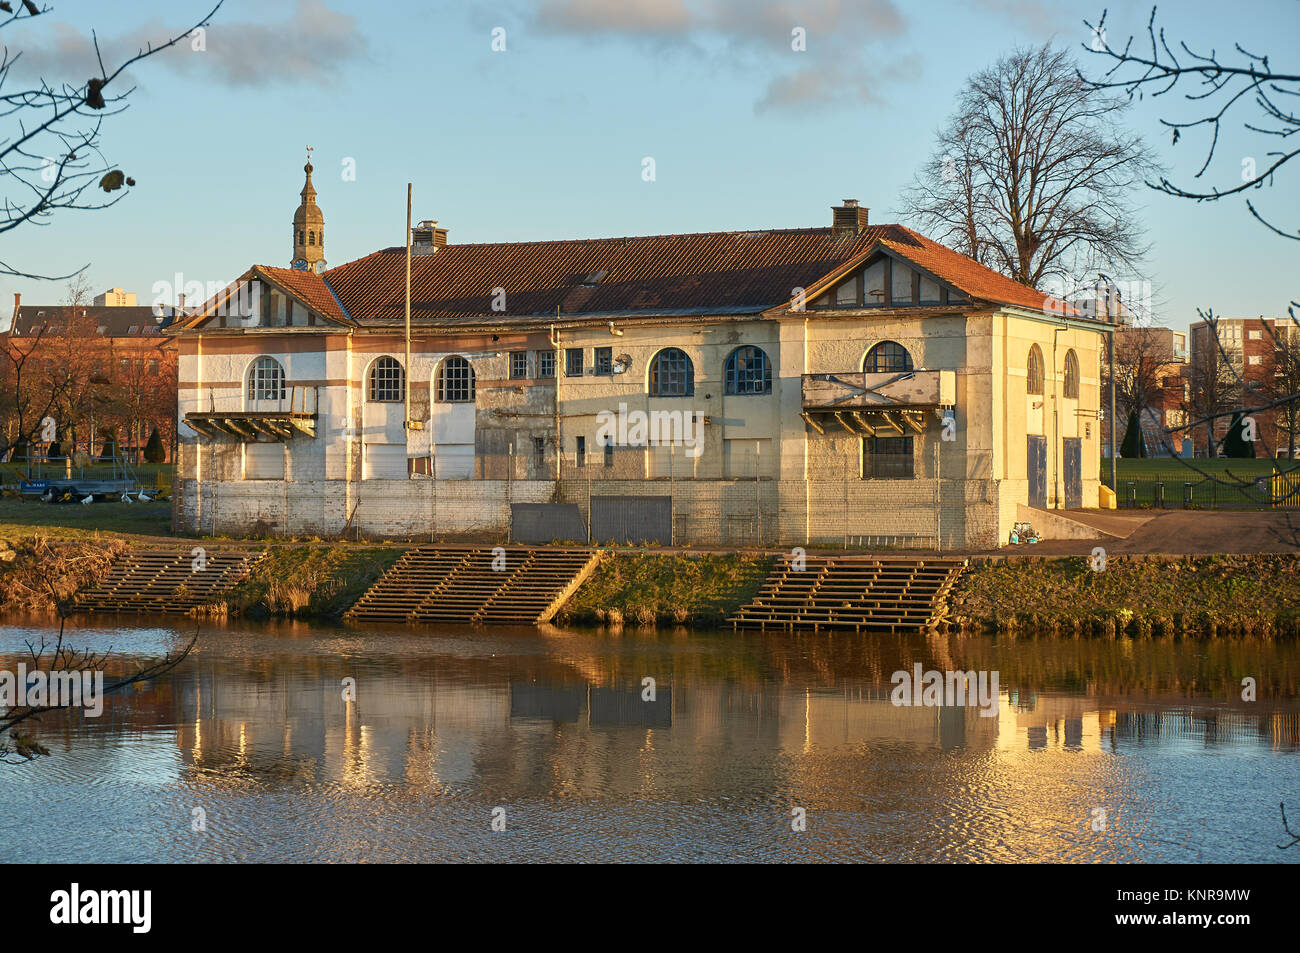 Glasgow, UK - 30 November 2017 : A historic boathouse of a Clydesdale Amateur Rowing Club in Glasgow Green park. Stock Photo